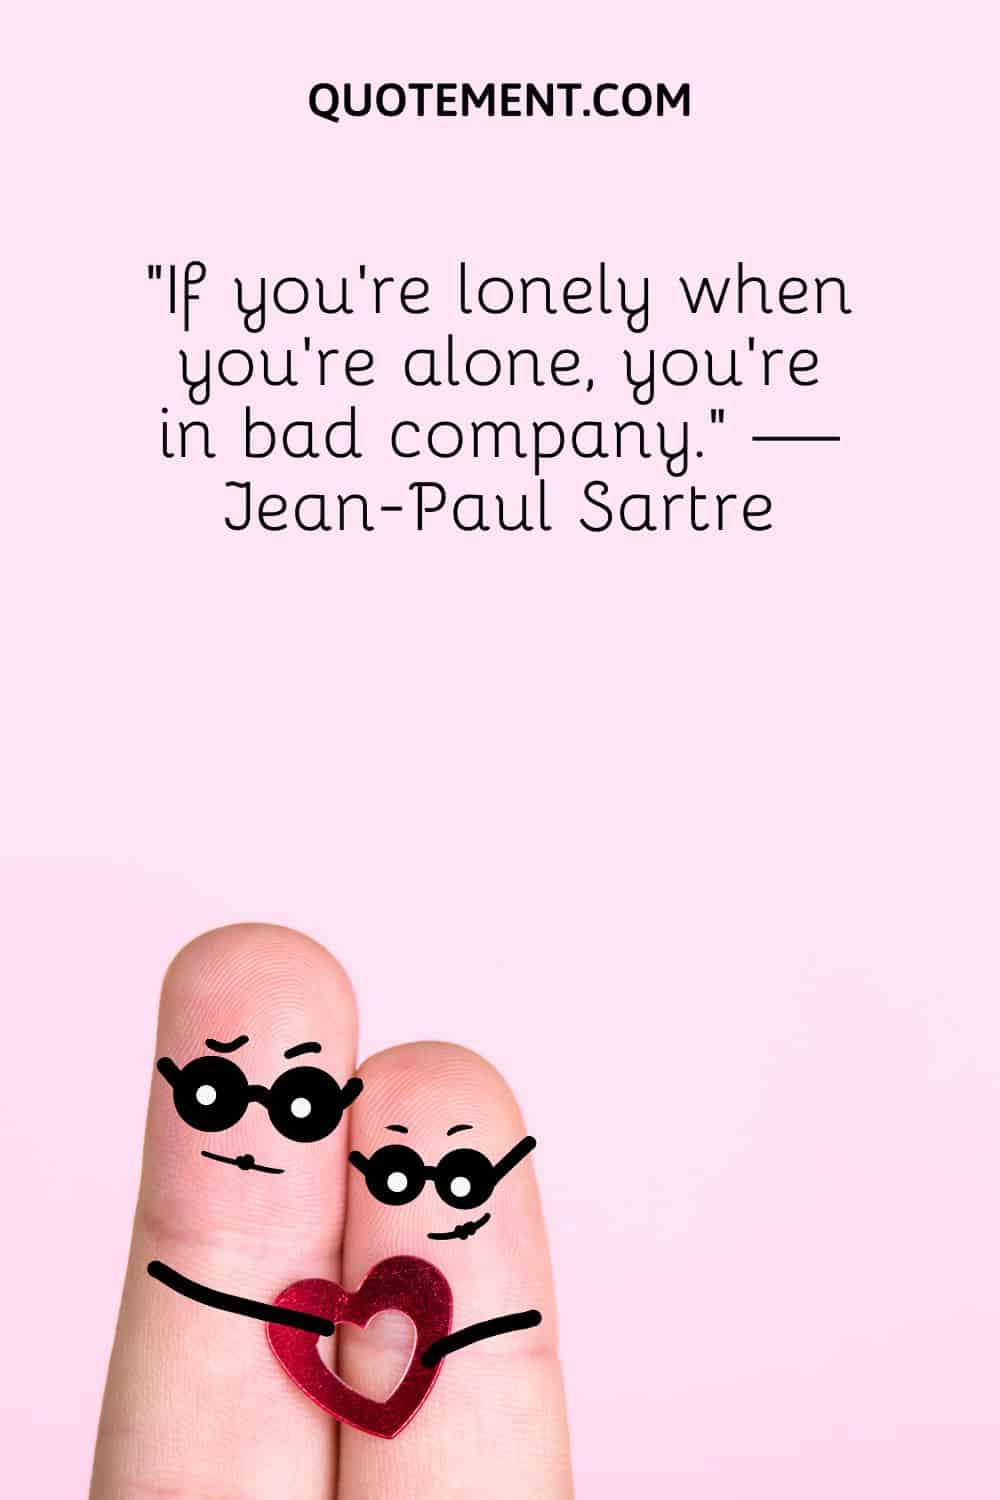 “If you’re lonely when you’re alone, you’re in bad company.” — Jean-Paul Sartre